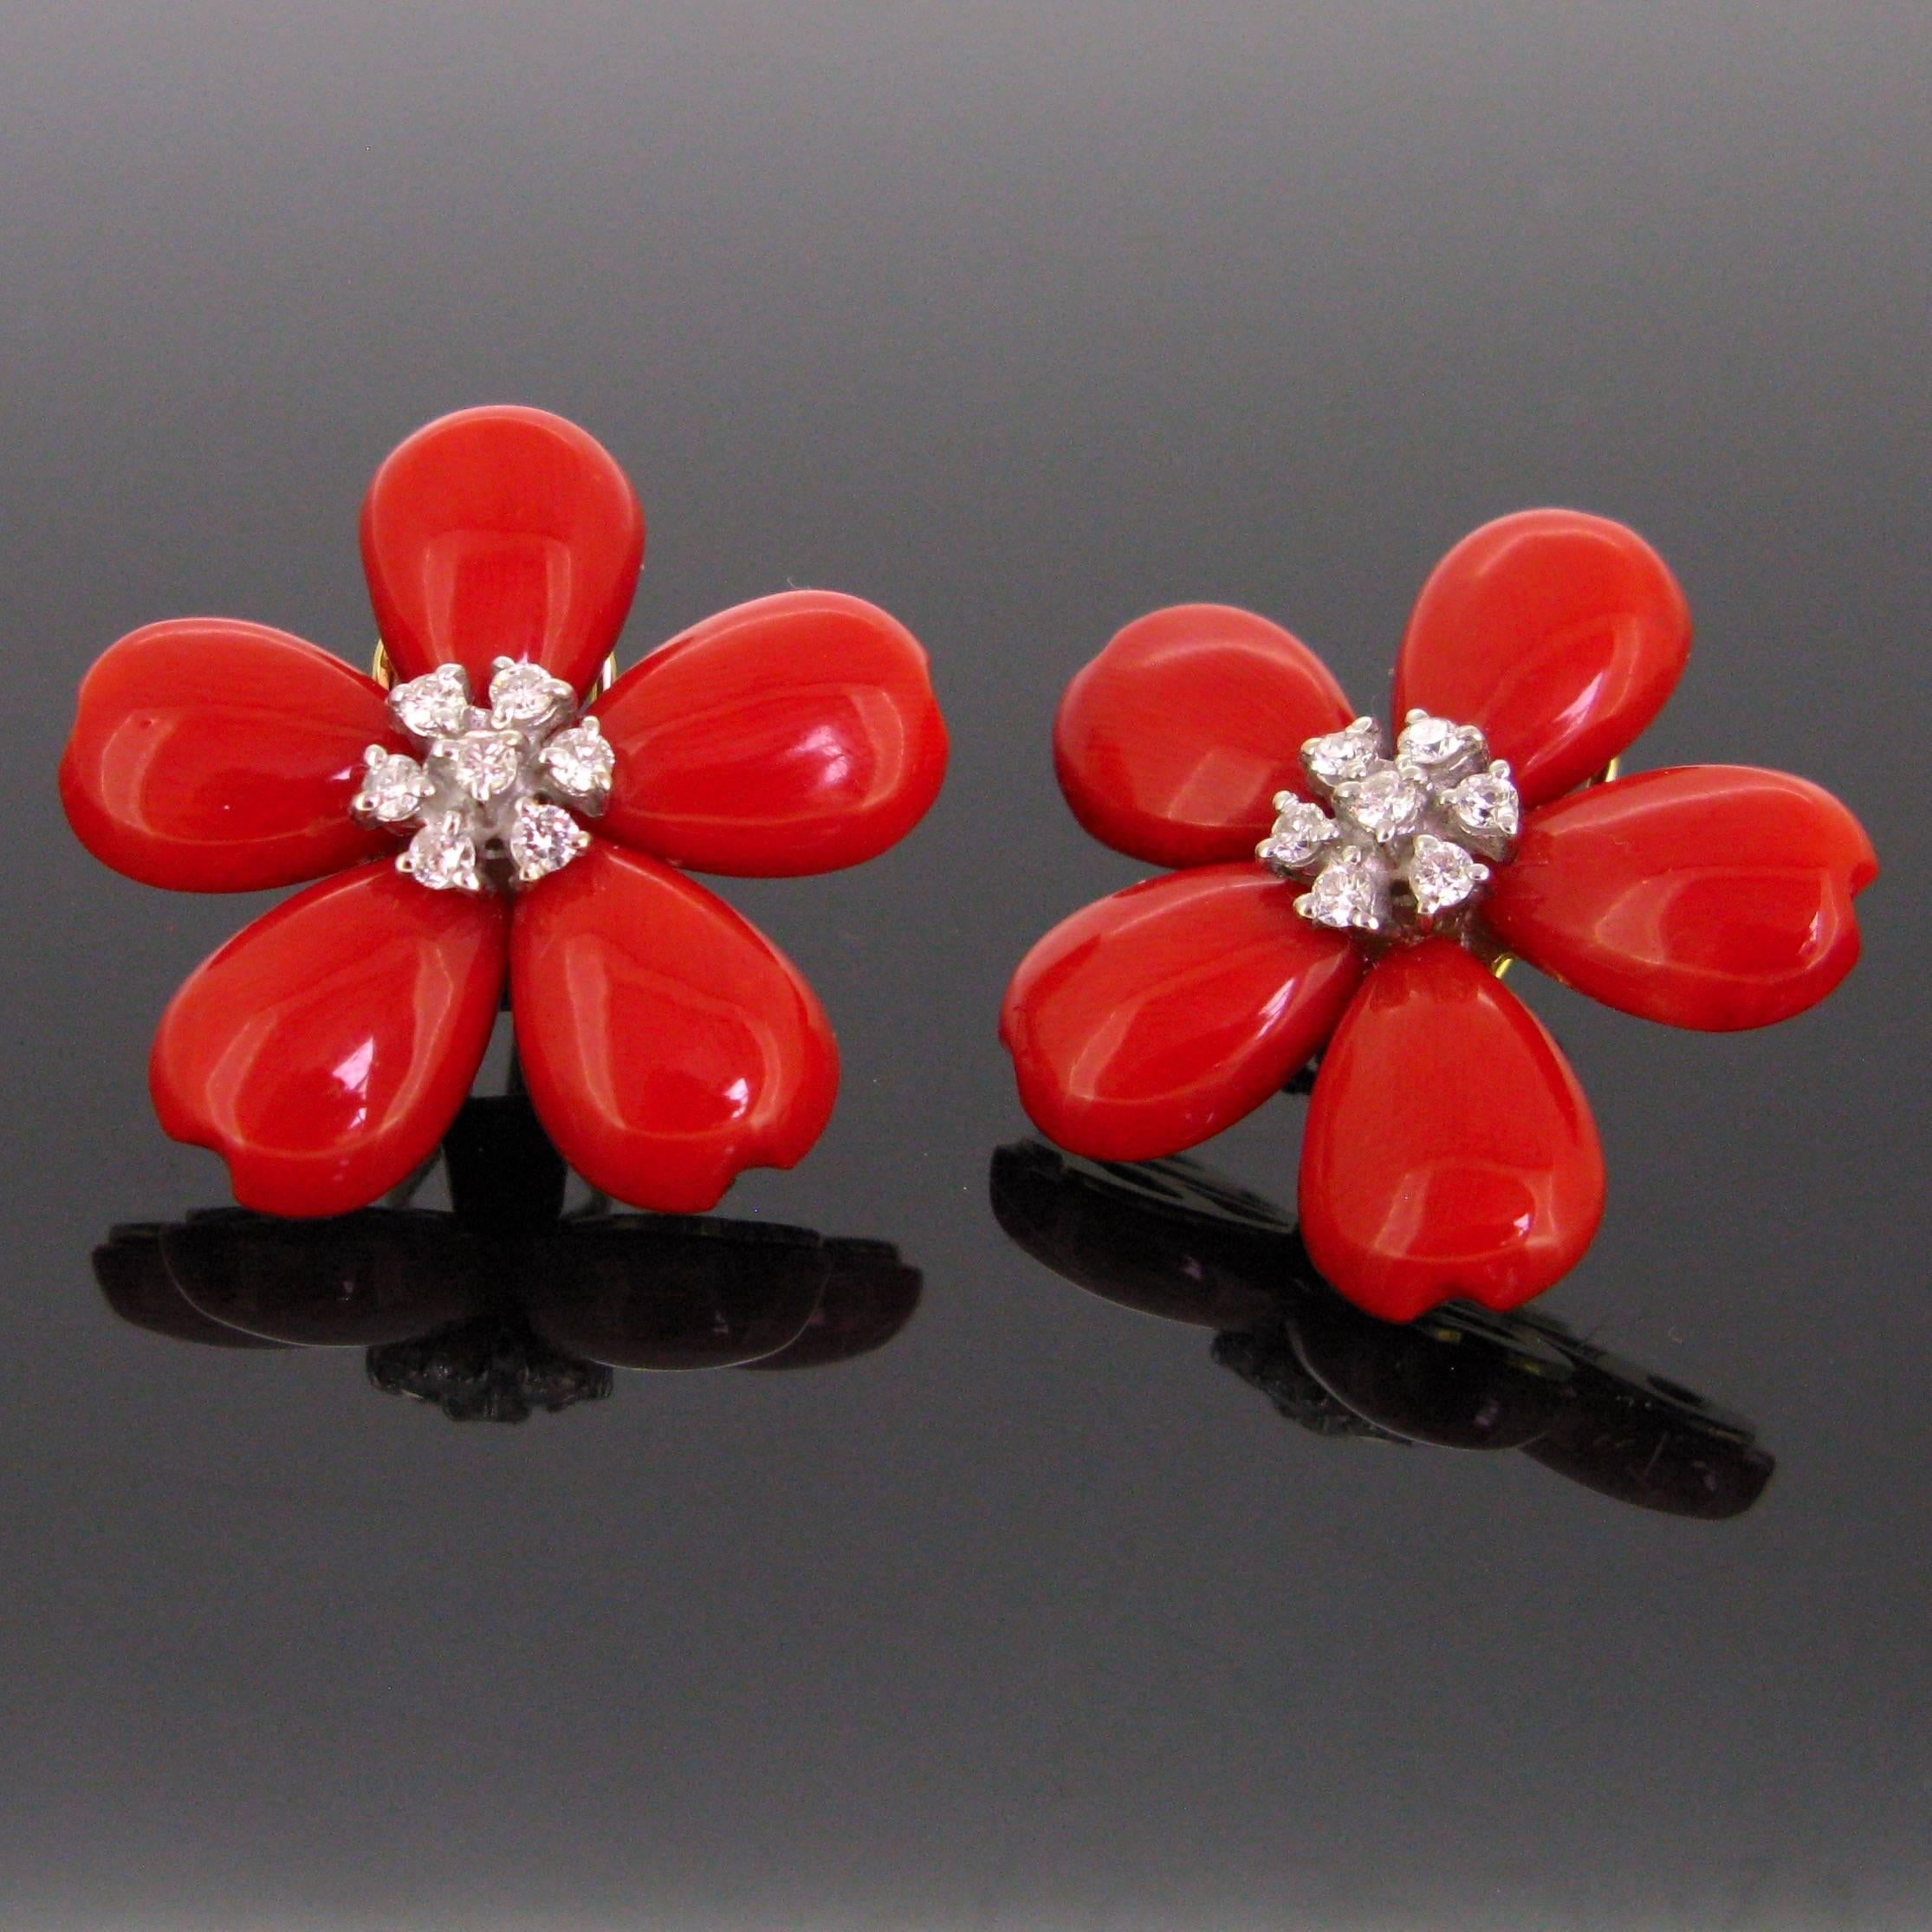 Modern Flower Petals Corals and Brilliant cut Diamonds Earrings Clips 1